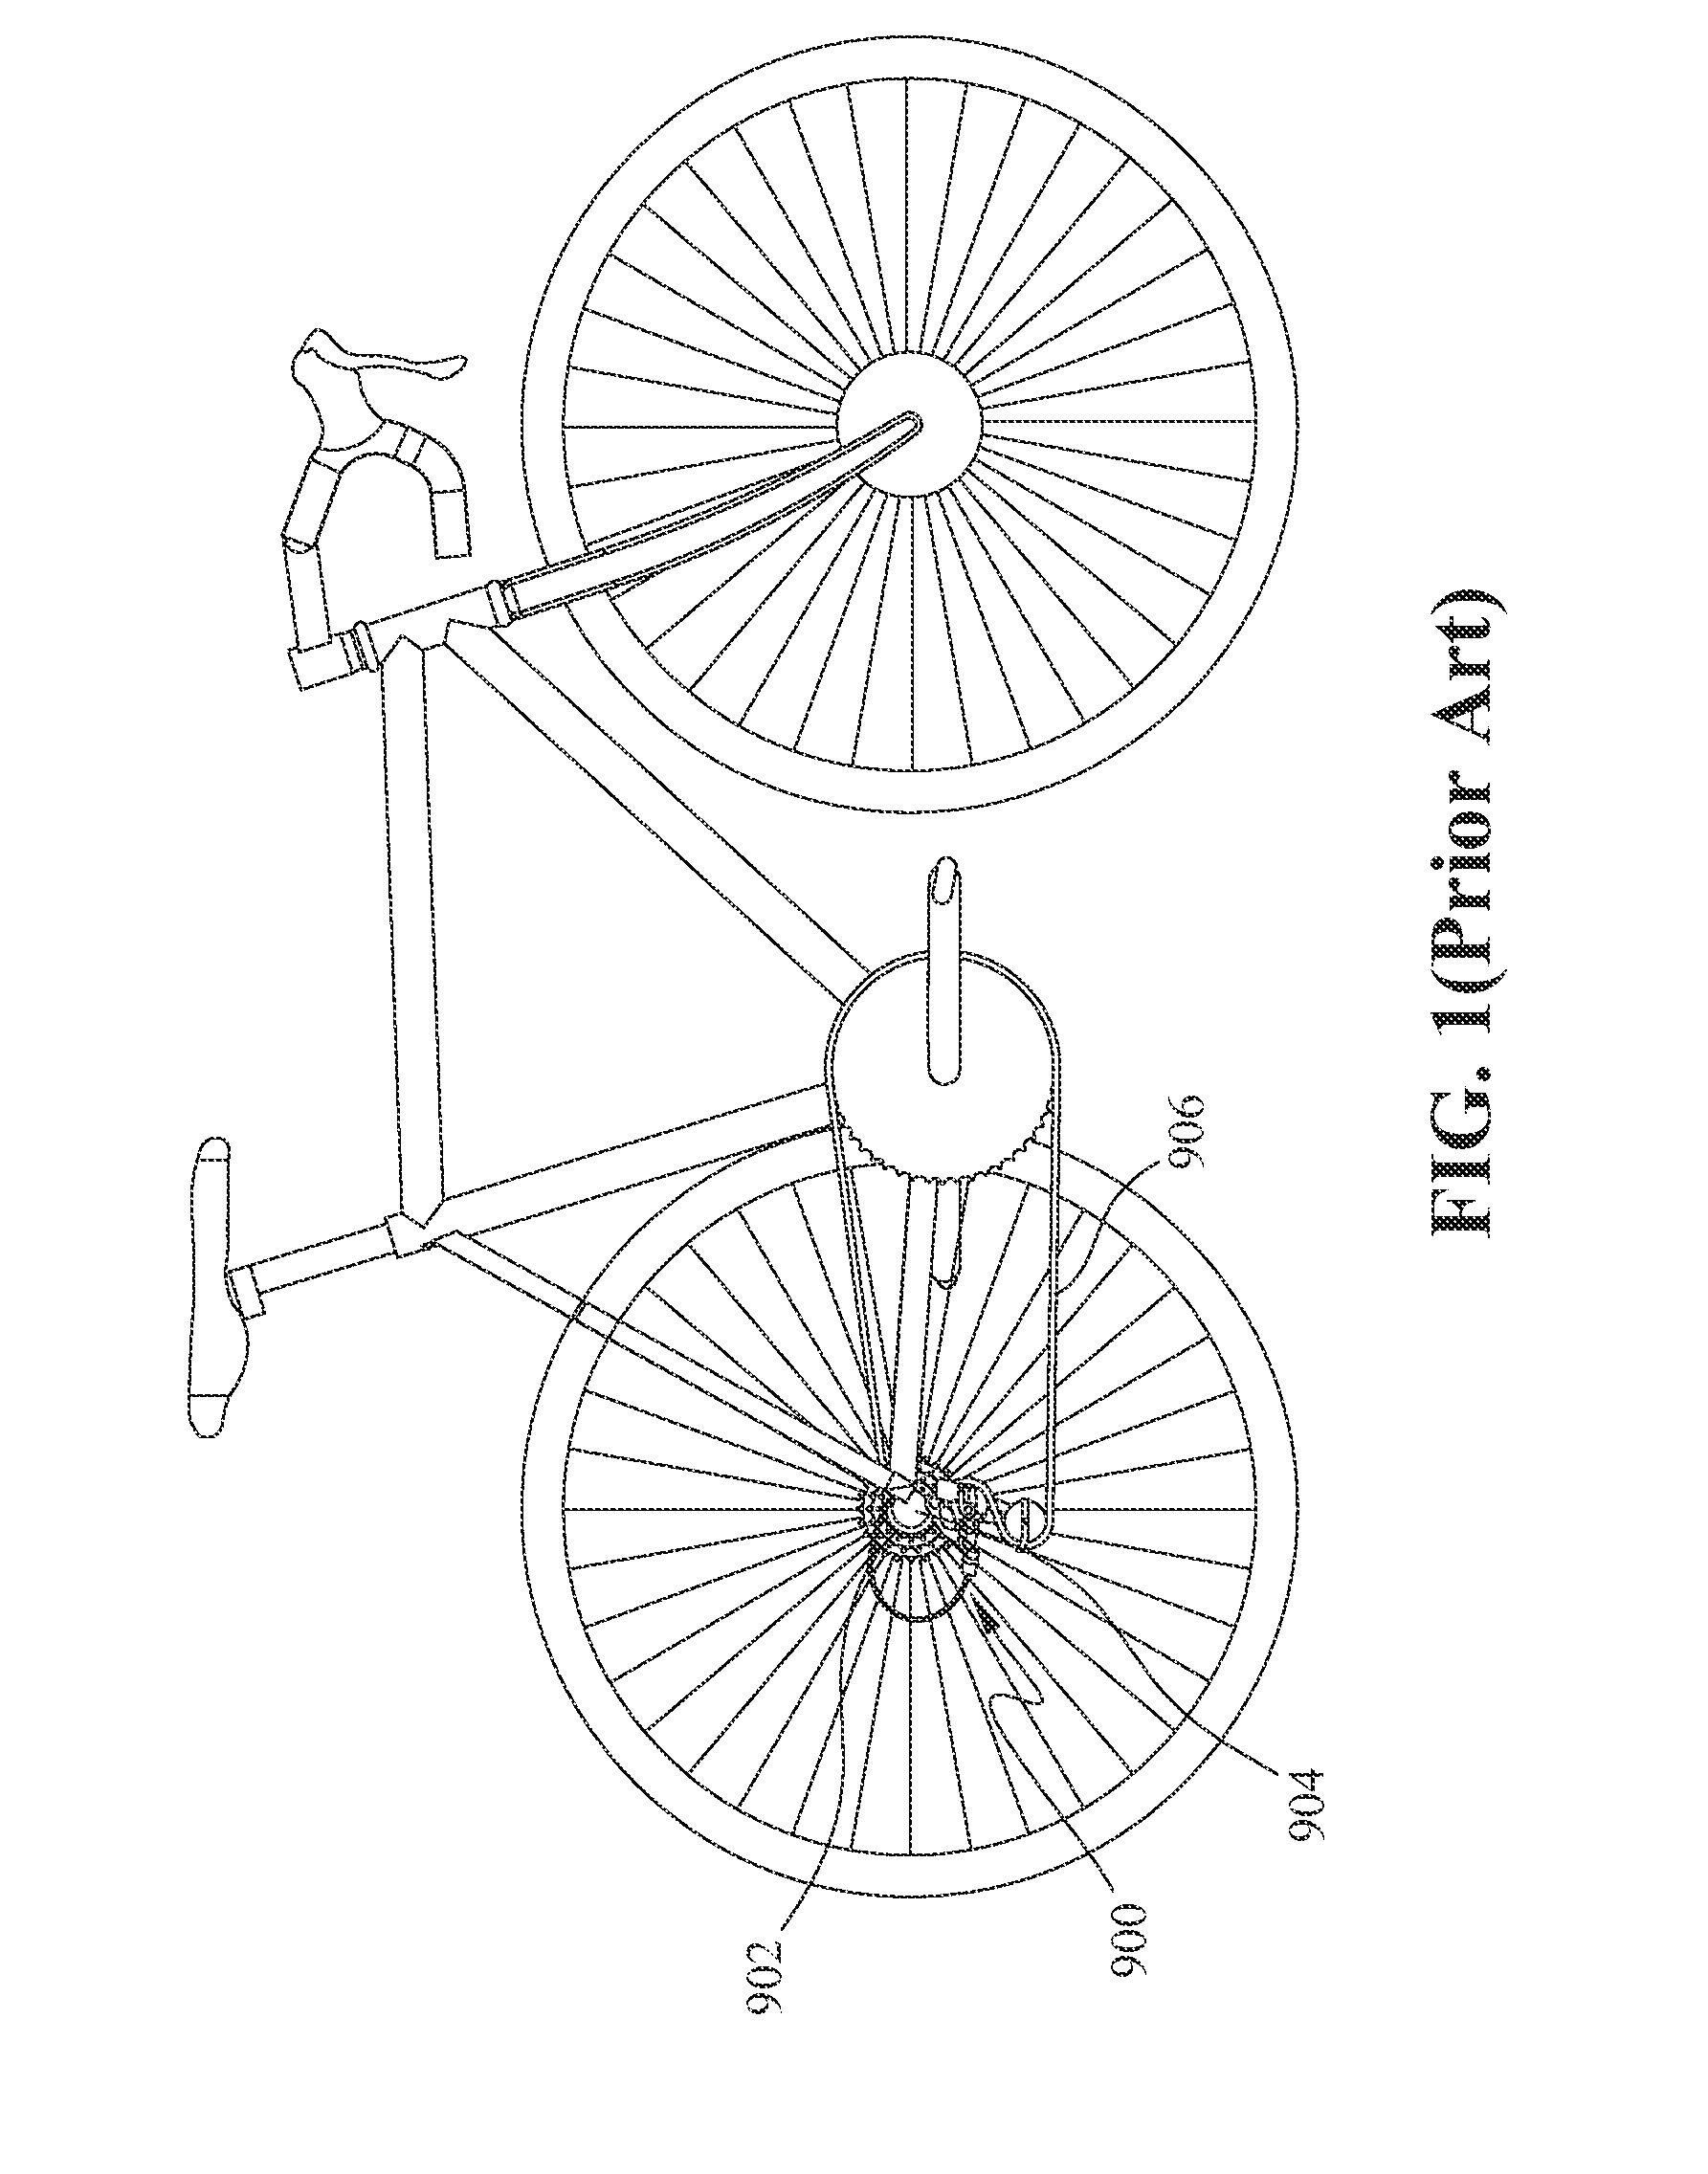 Multi-Ratio Transmission System with Parallel Vertical and Coaxial Planet Gears